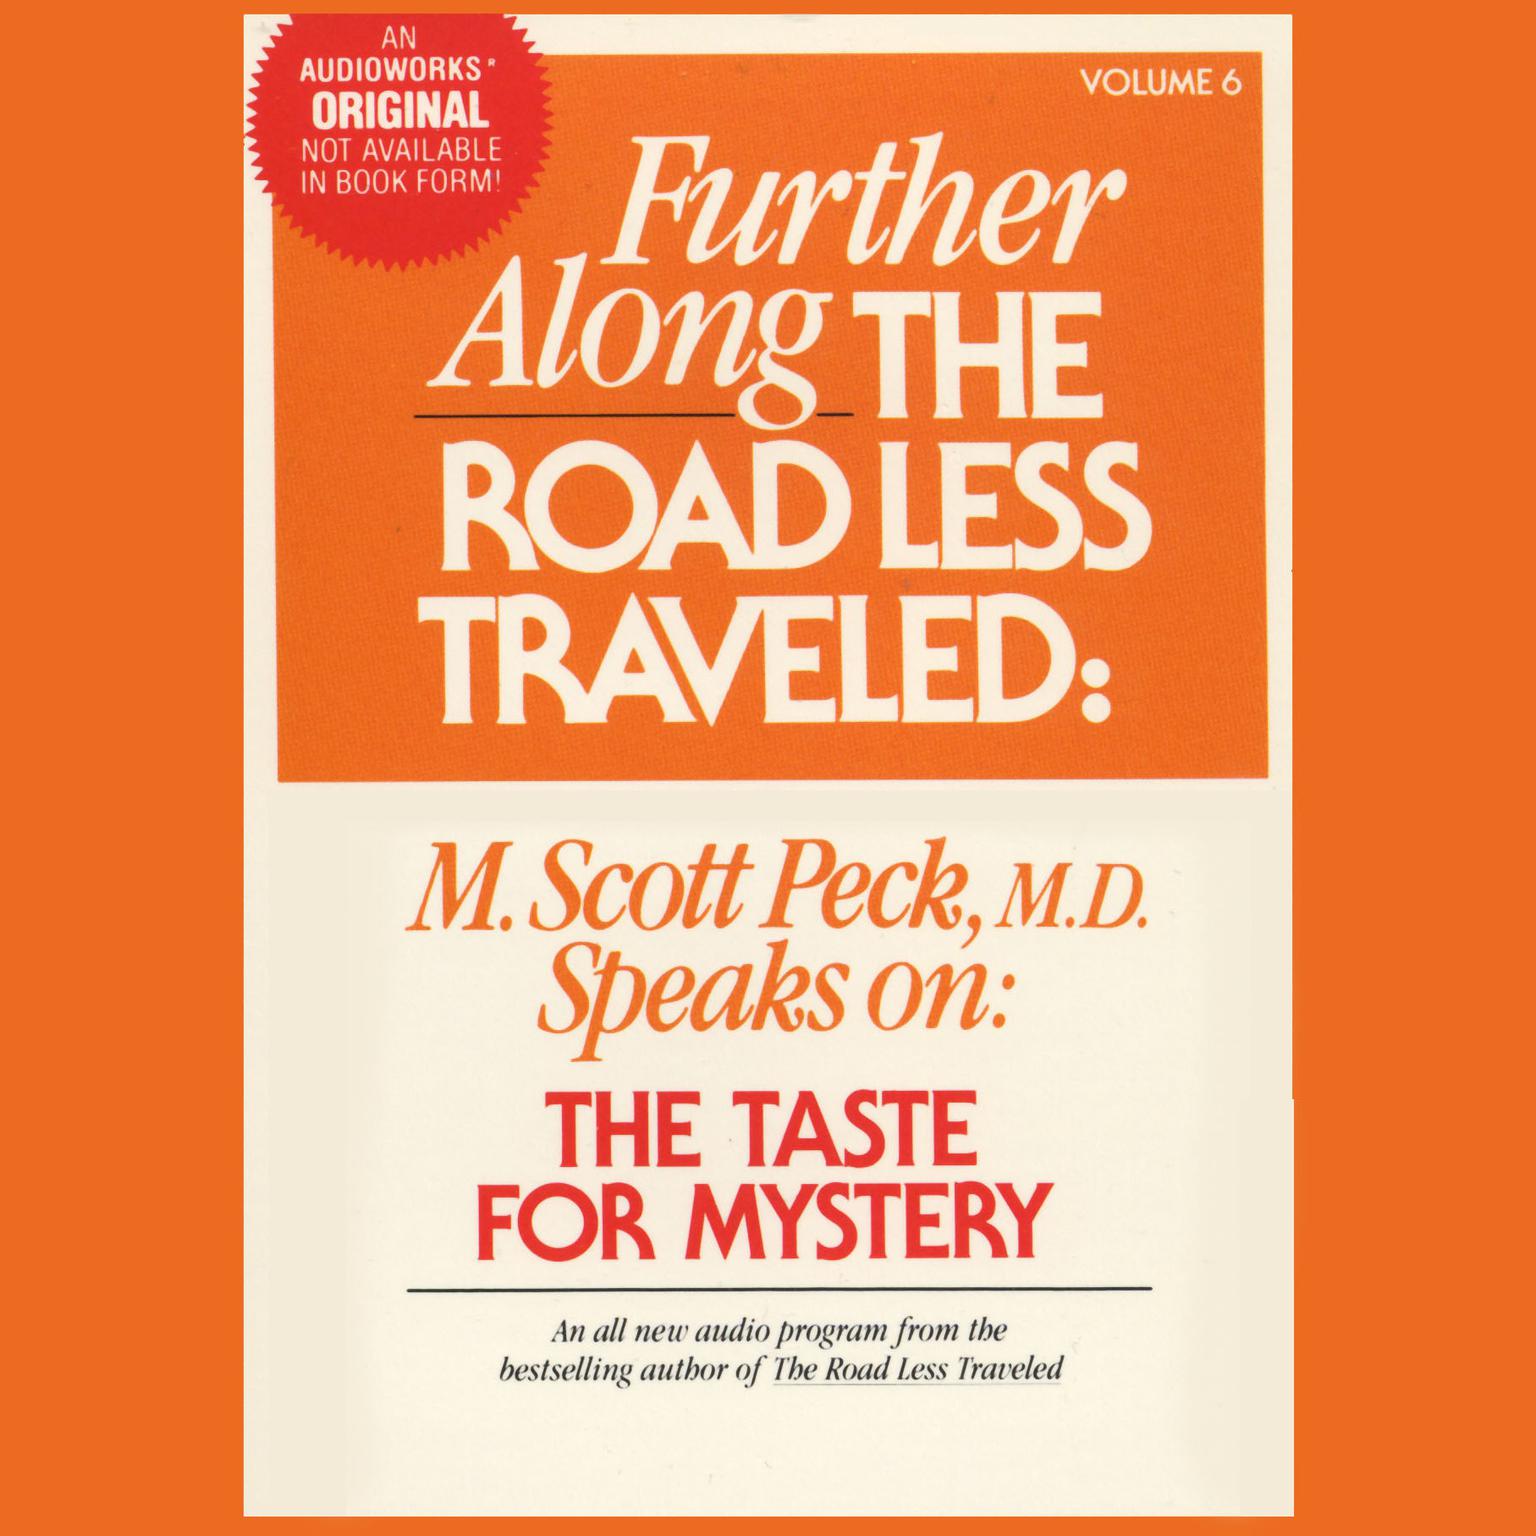 Further along the Road Less Traveled: The Taste for Mystery (Abridged) Audiobook, by M. Scott Peck